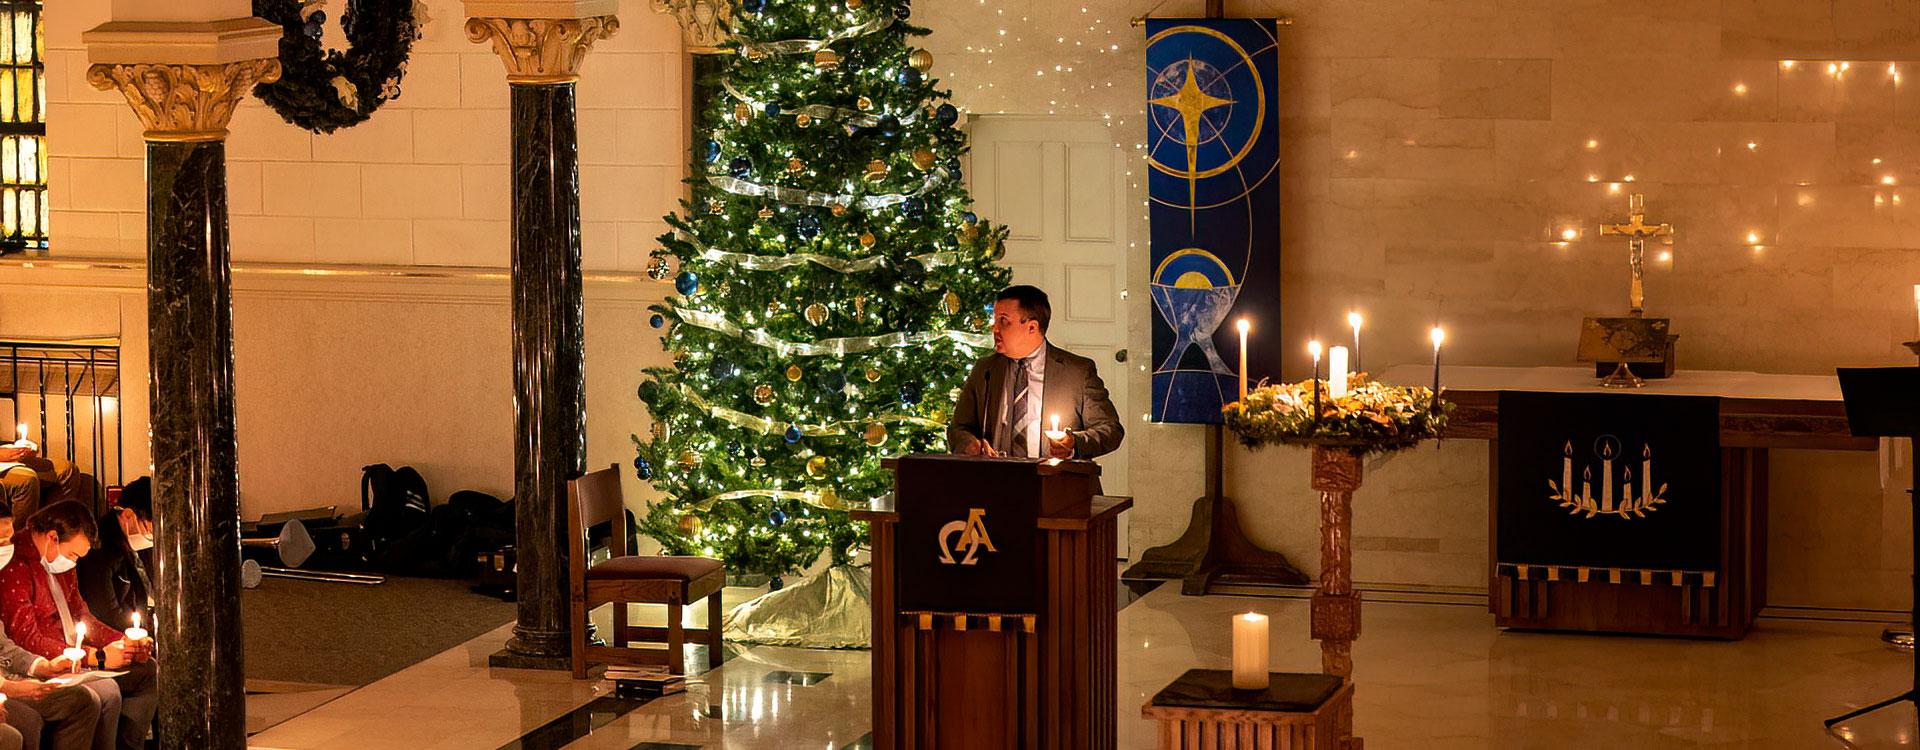 Service of Light for WLC Christmas in the Chapel